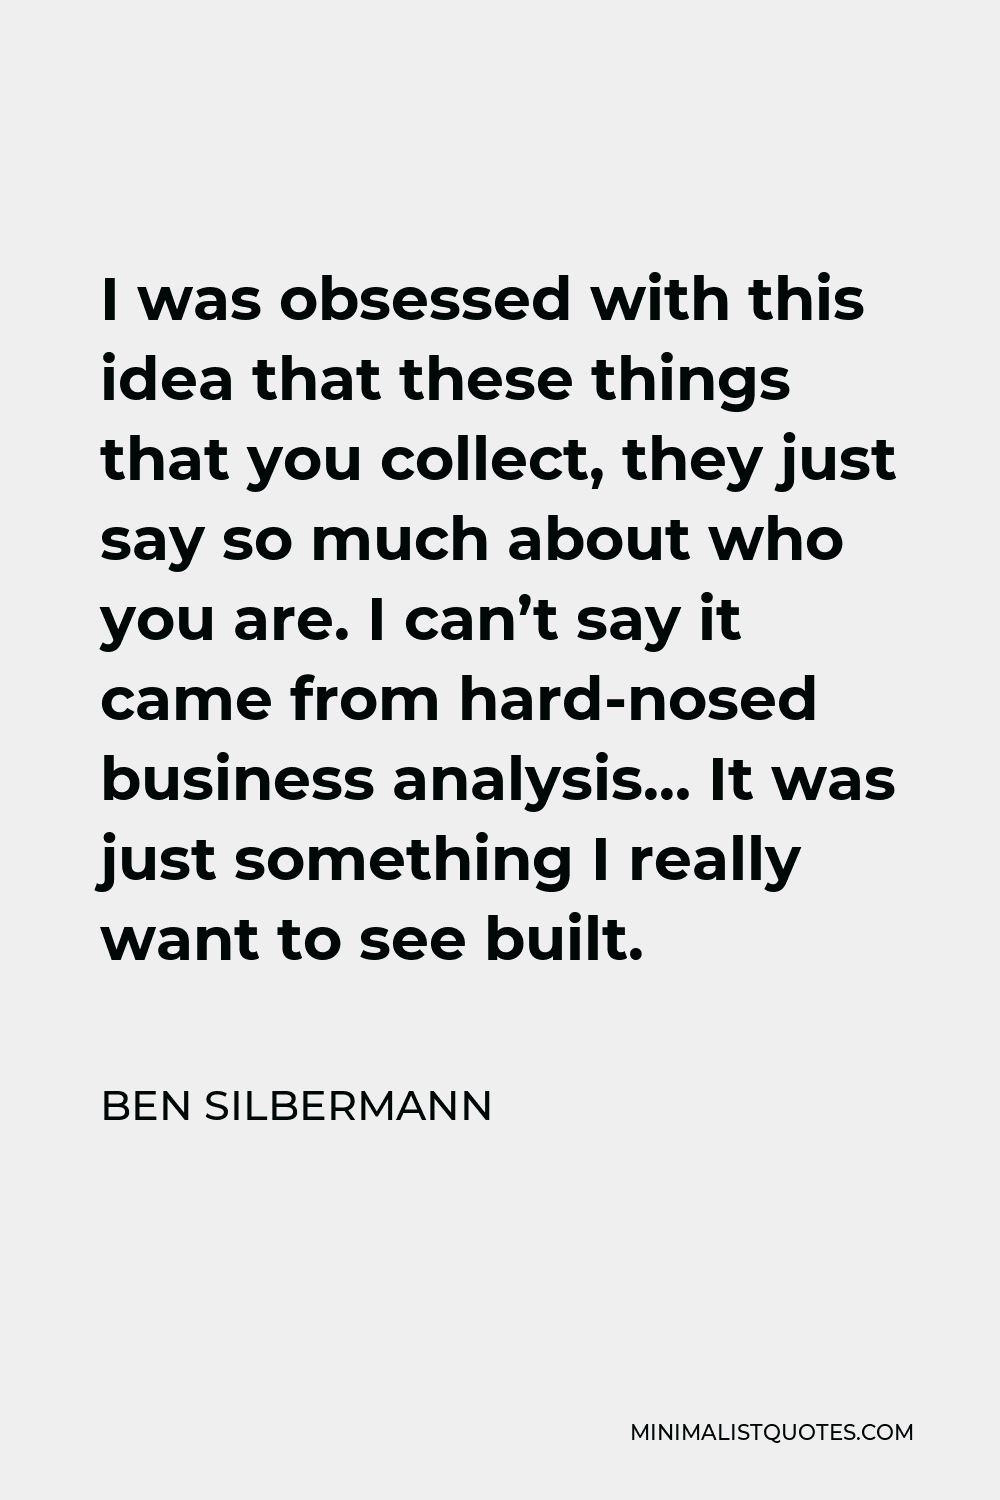 Ben Silbermann Quote - I was obsessed with this idea that these things that you collect, they just say so much about who you are. I can’t say it came from hard-nosed business analysis… It was just something I really want to see built.